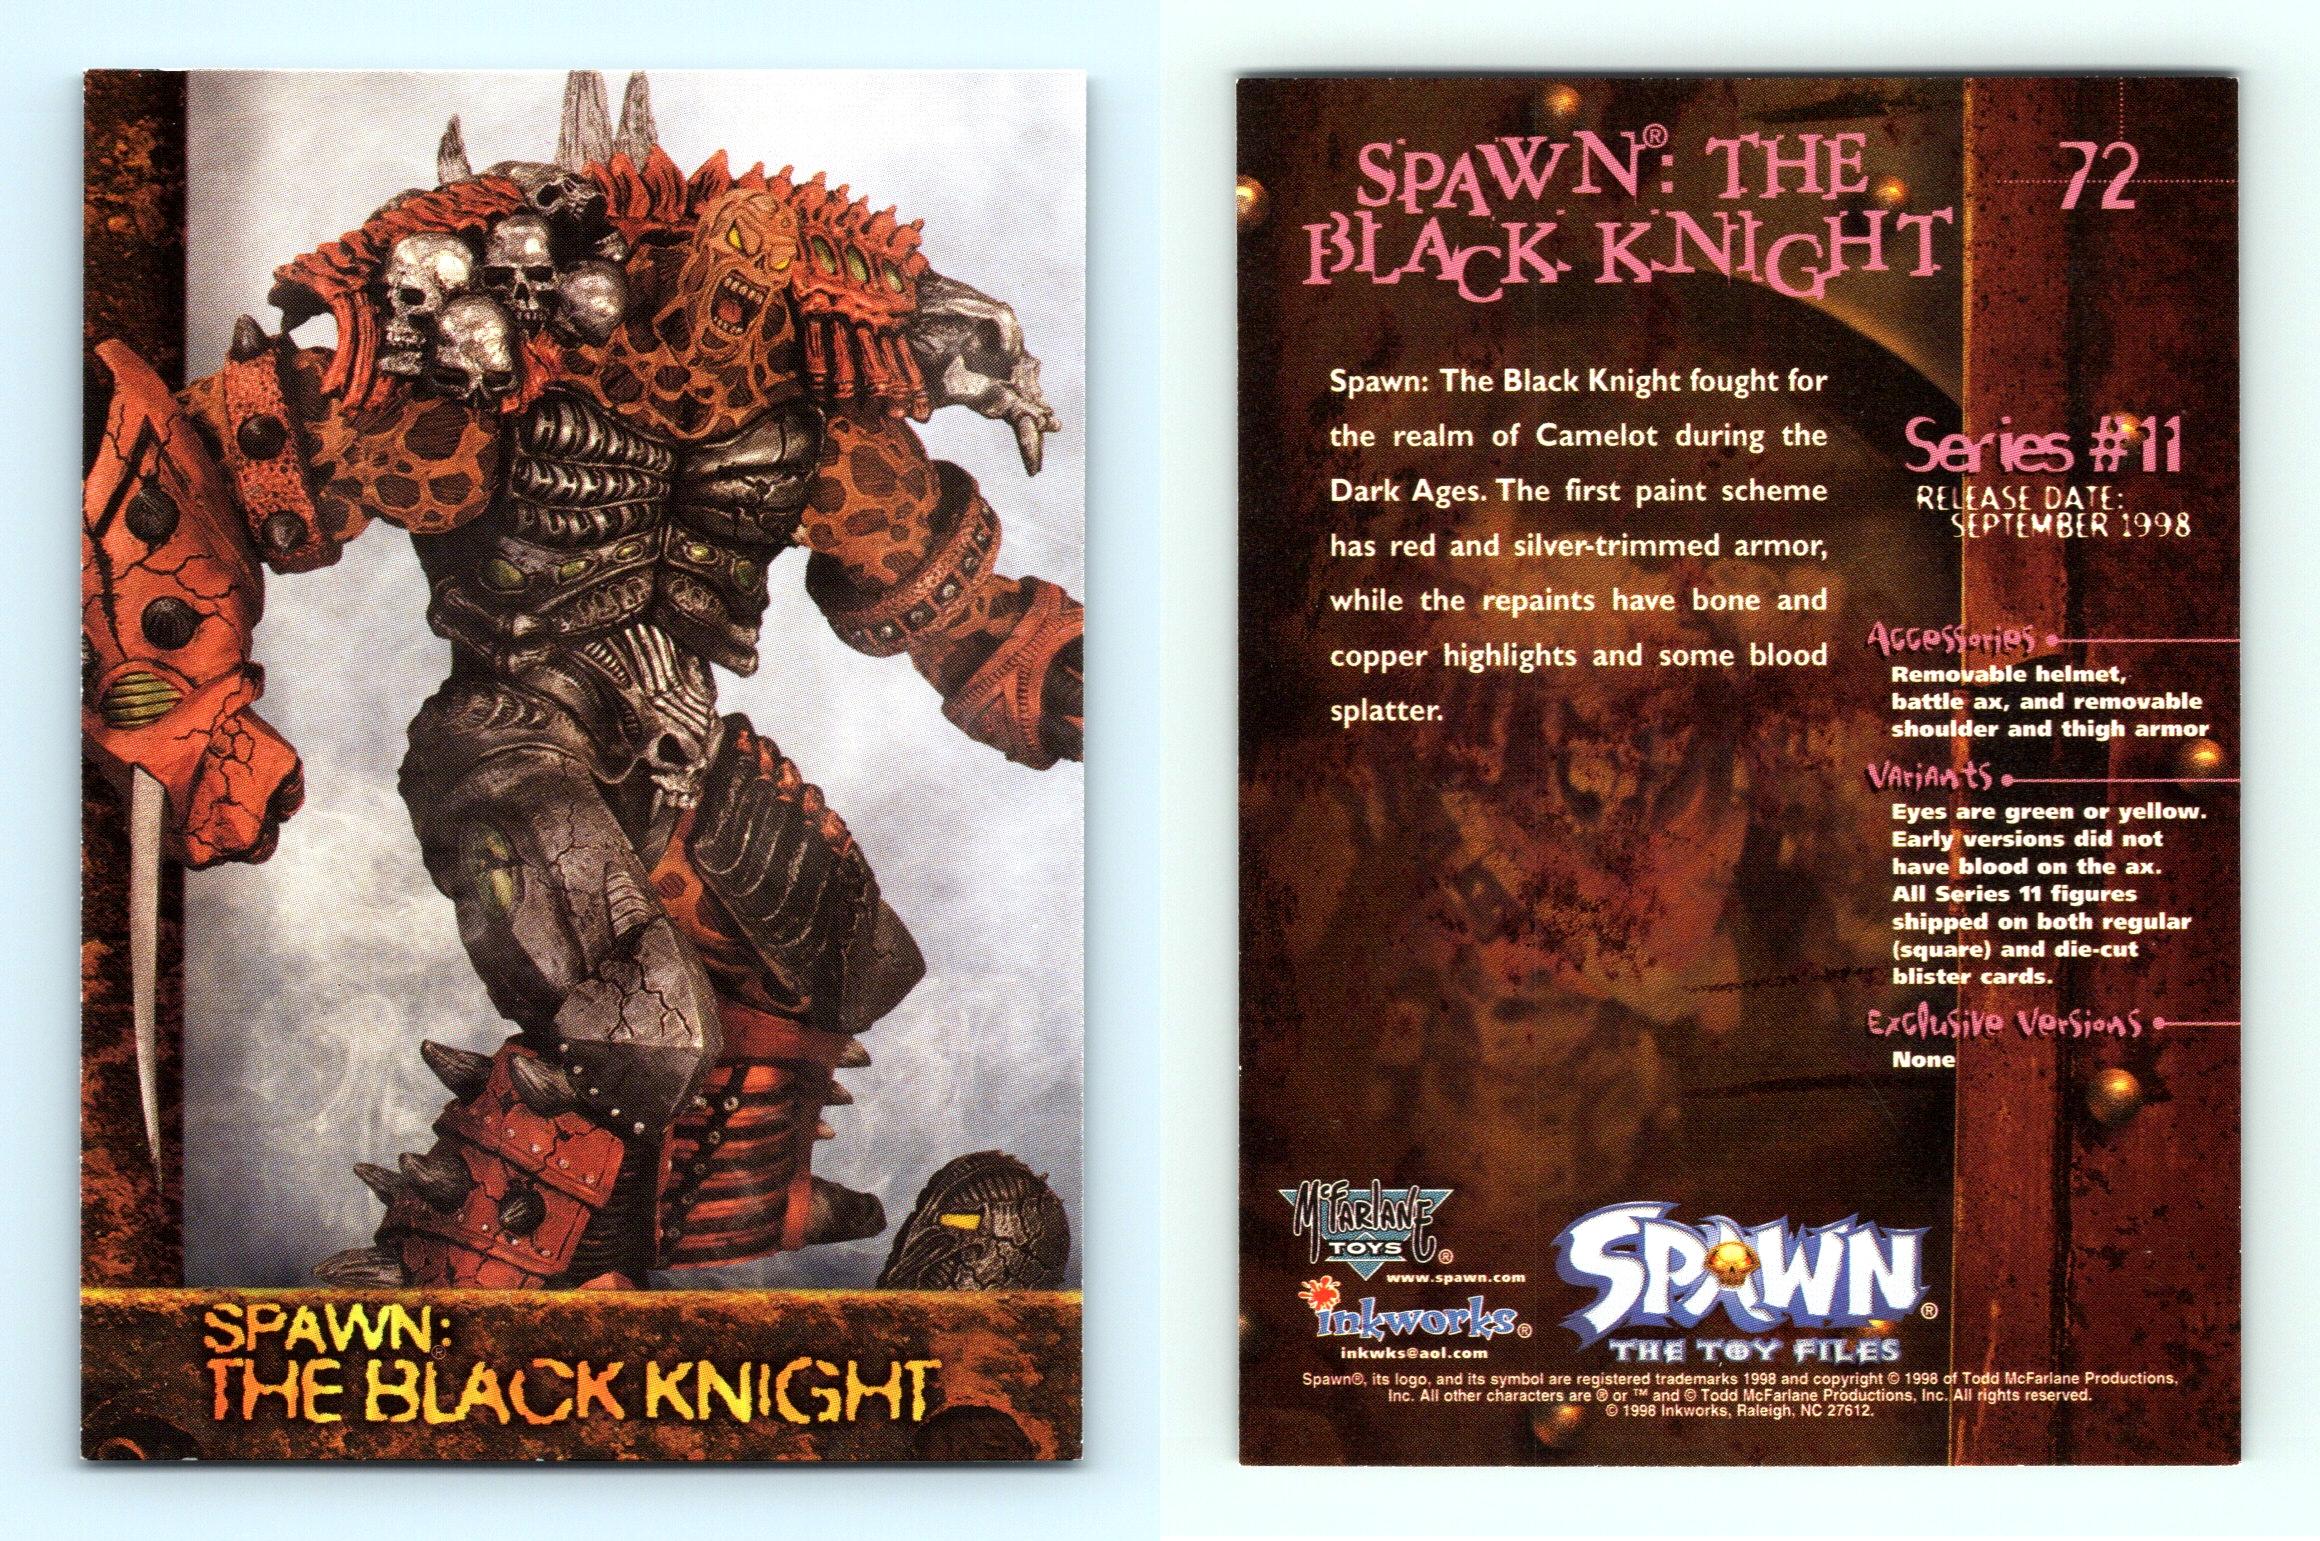 Spawn The Toy Files Trading Card Box 